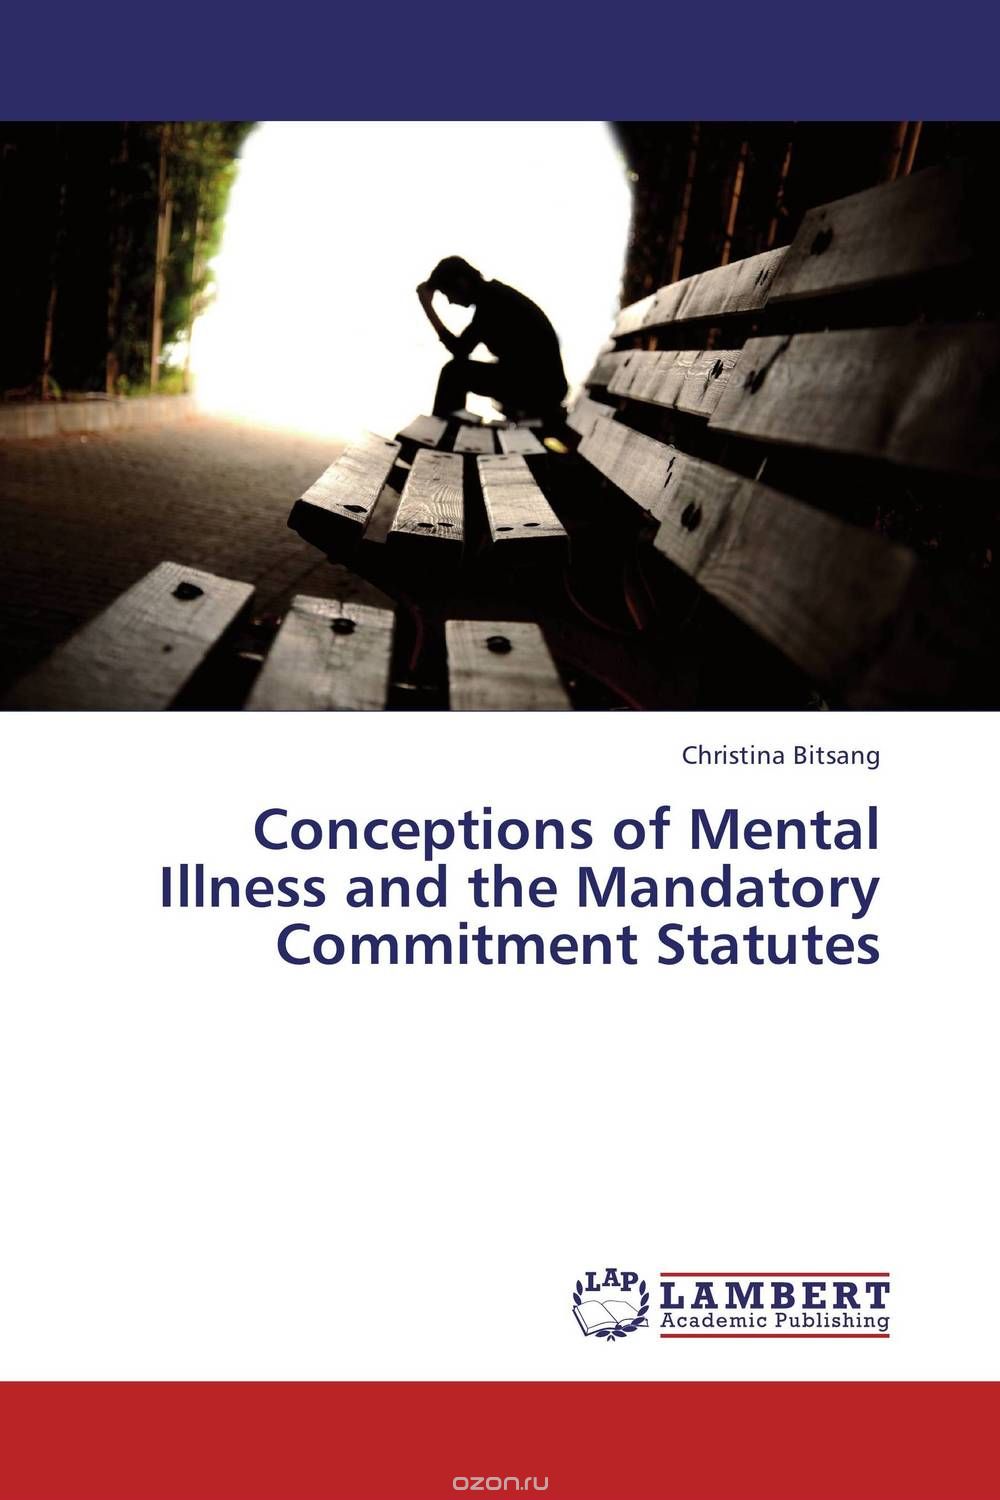 Conceptions of Mental Illness and the Mandatory Commitment Statutes